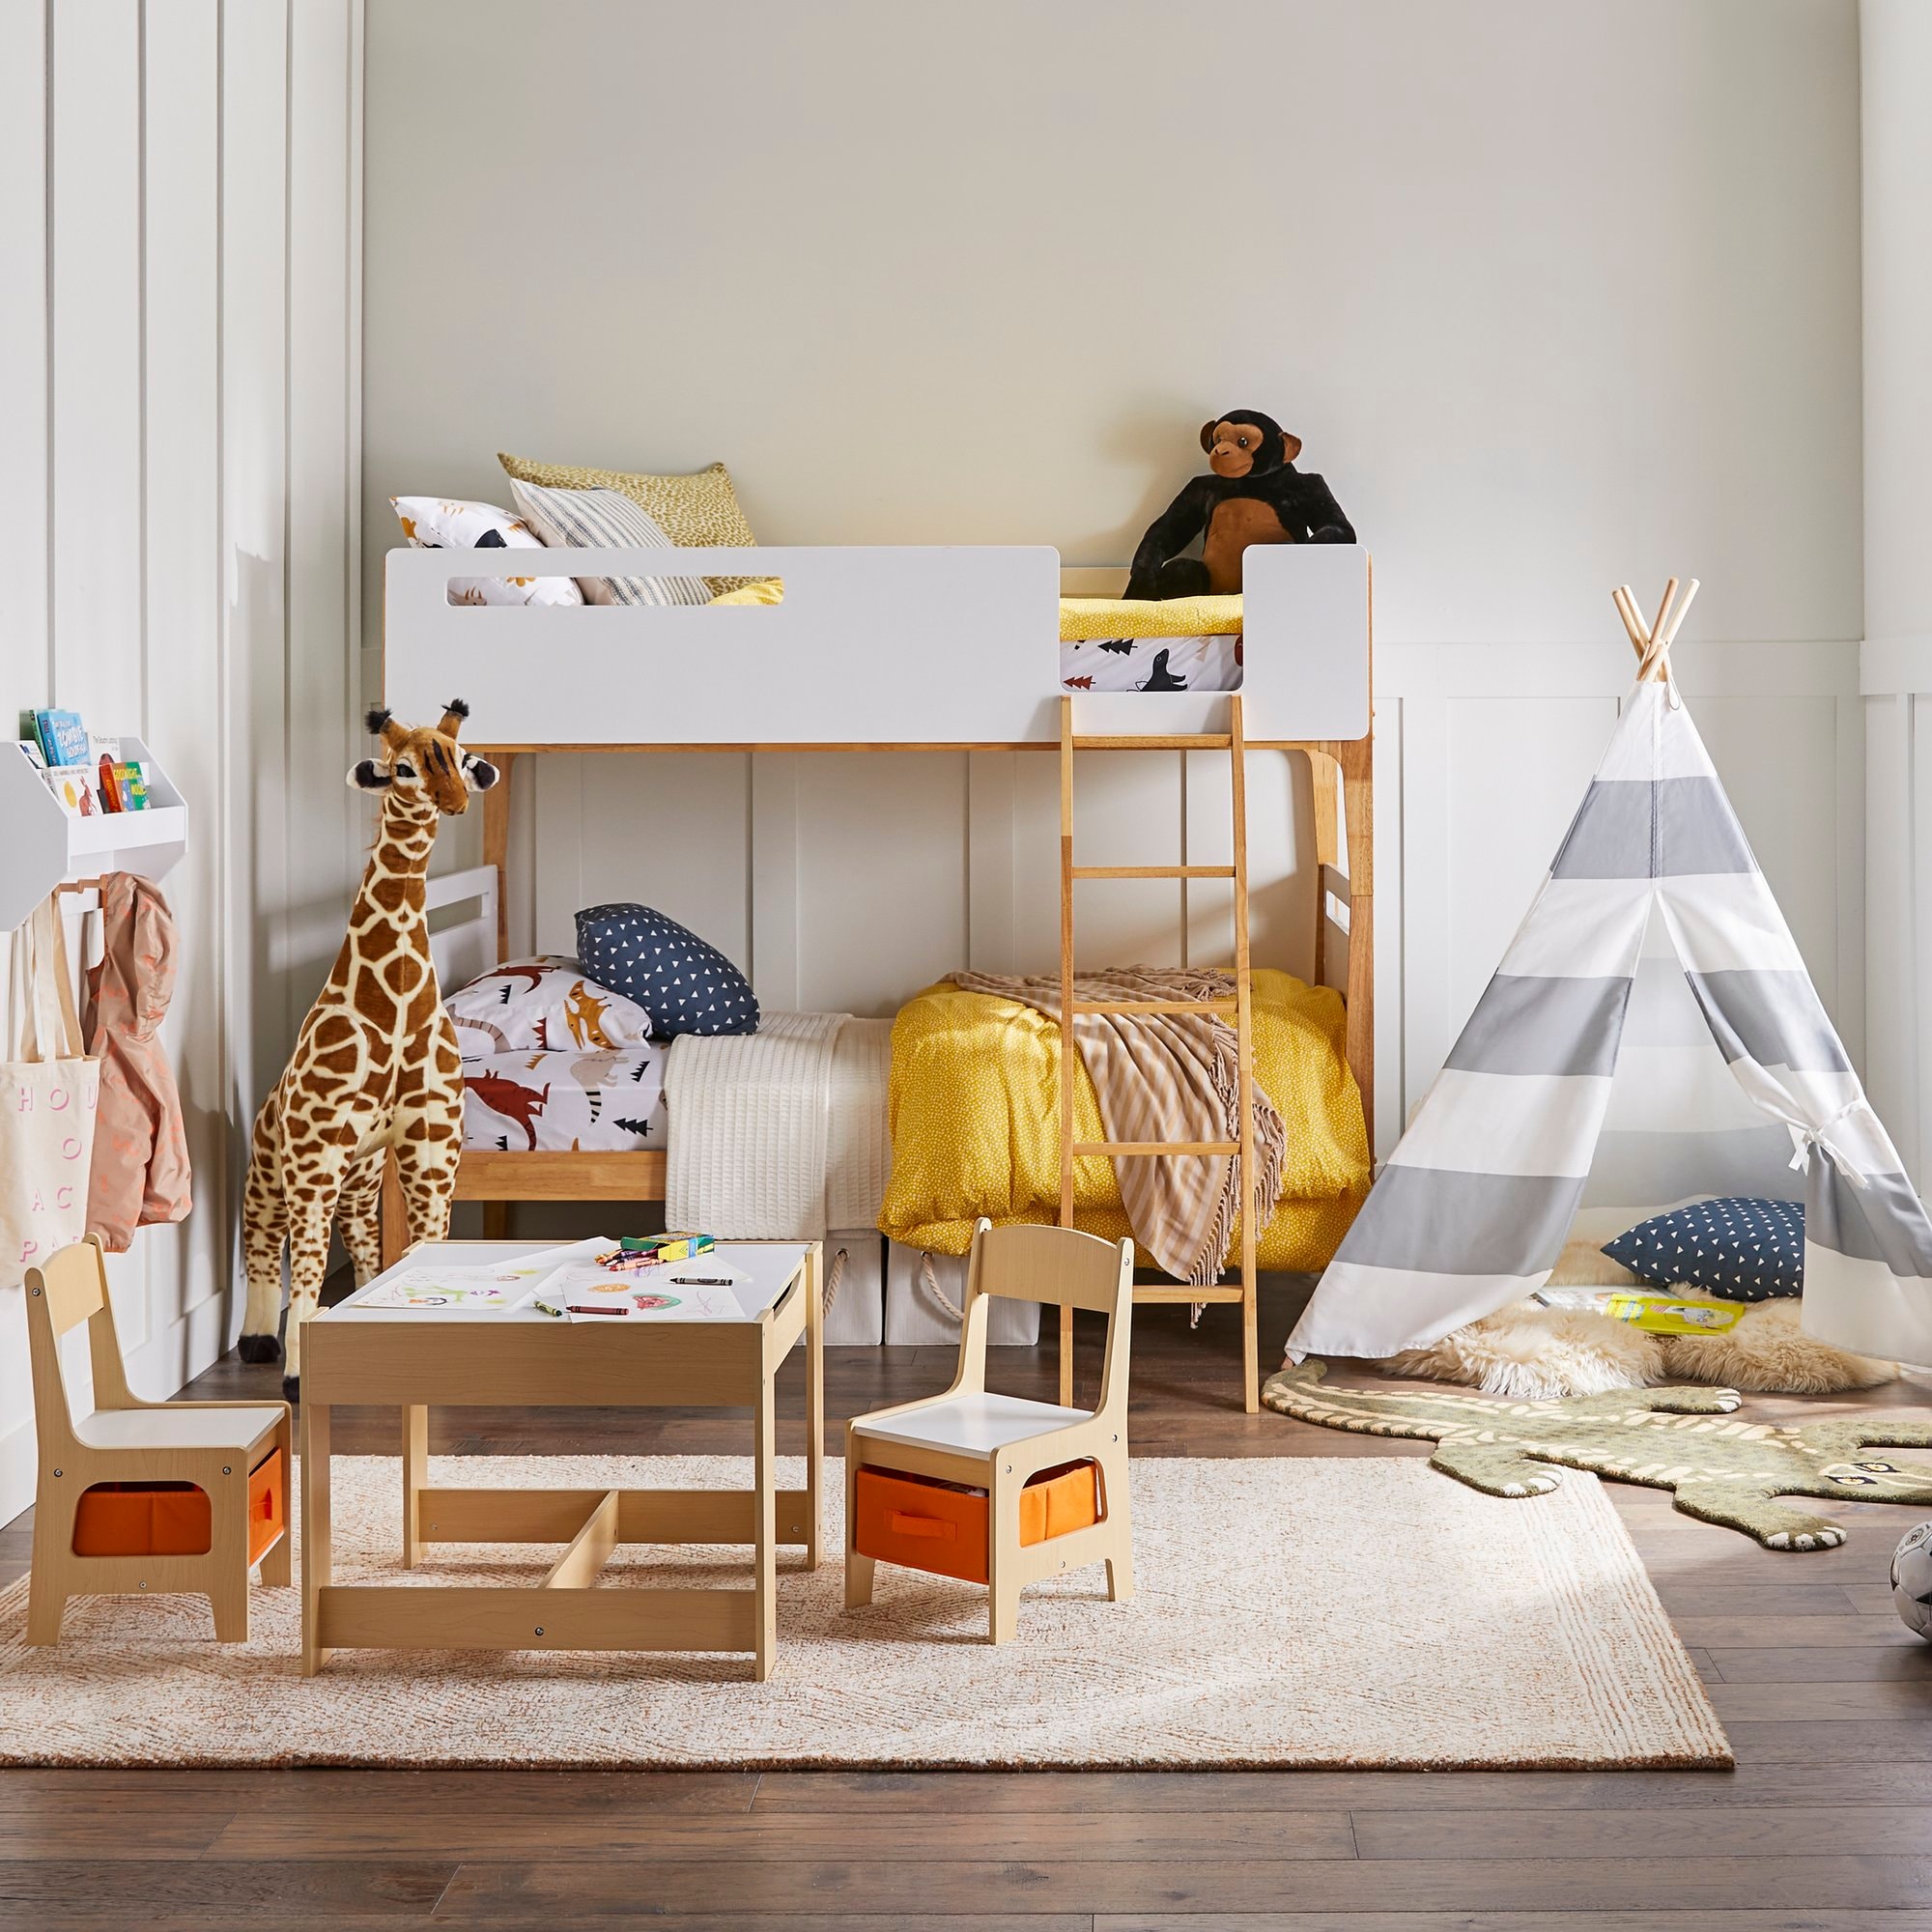 save an extra 10% on Select Kids' Furniture*